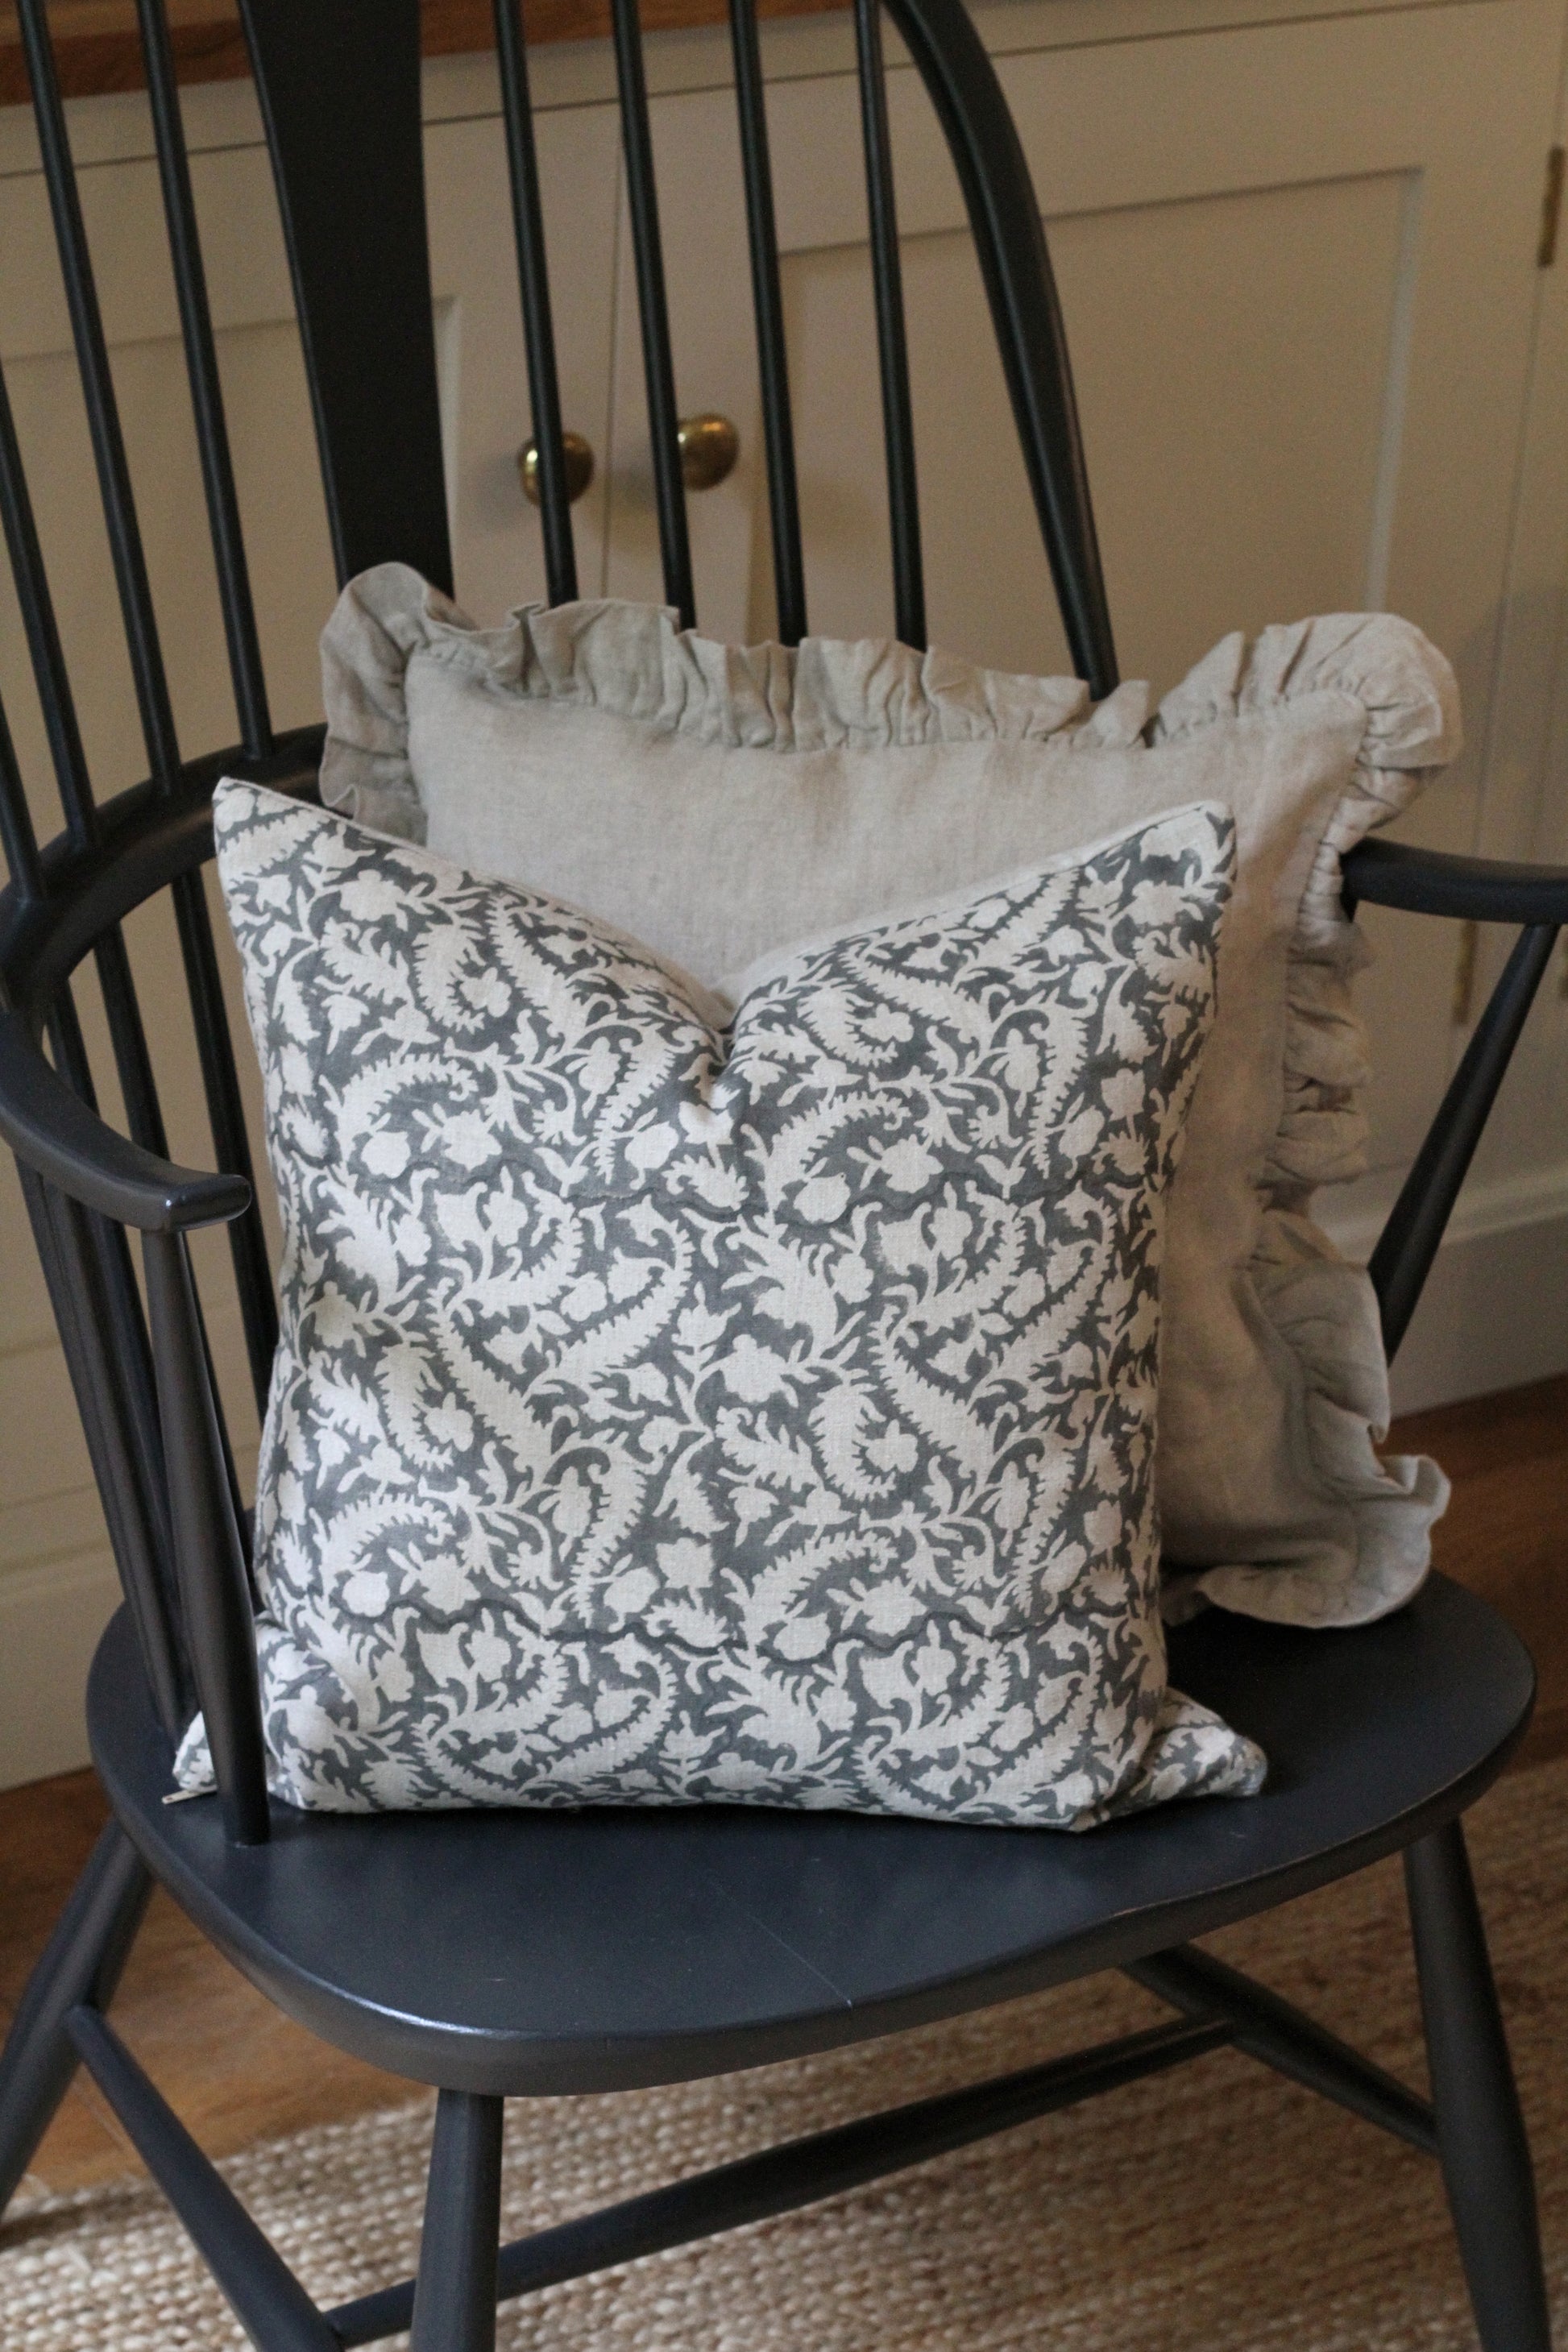 grey floral block printed cushion cover with a natrural colour background, linen. 45cm x 45cm.